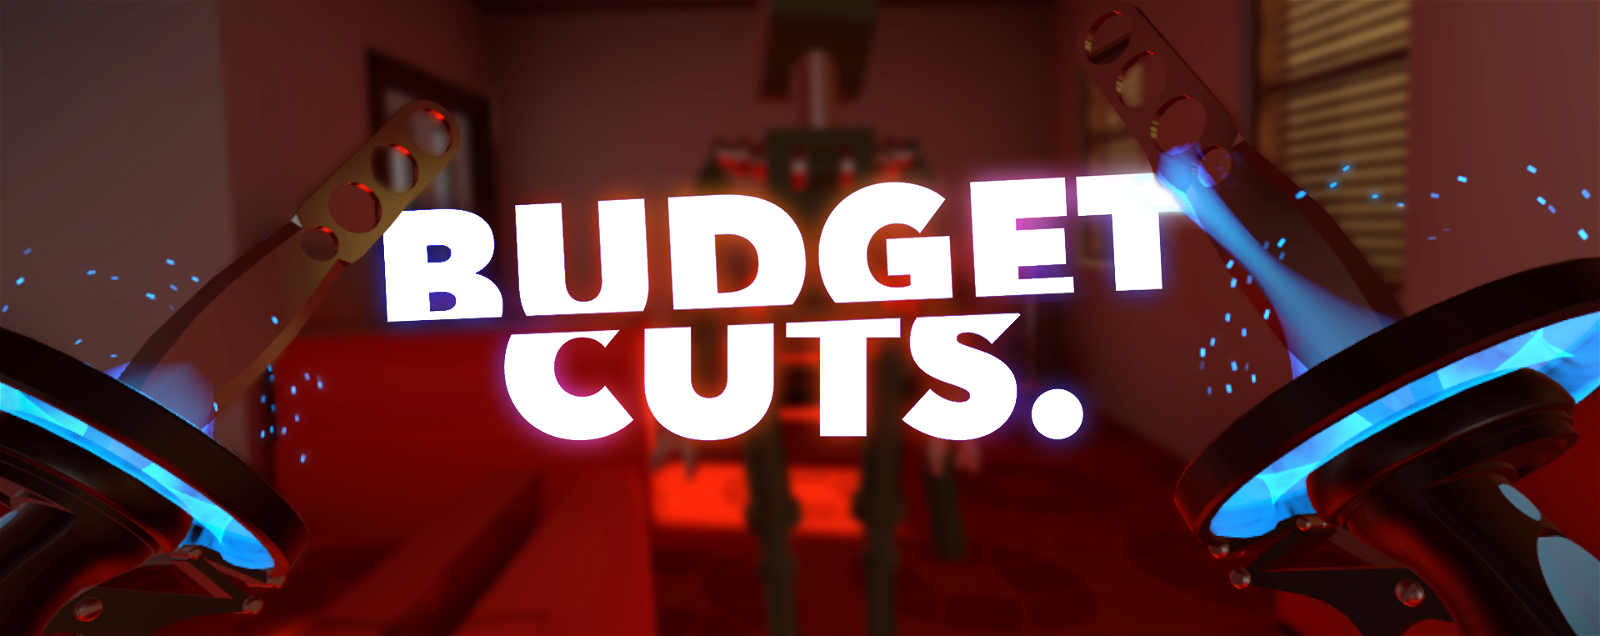 Image of Budget Cuts